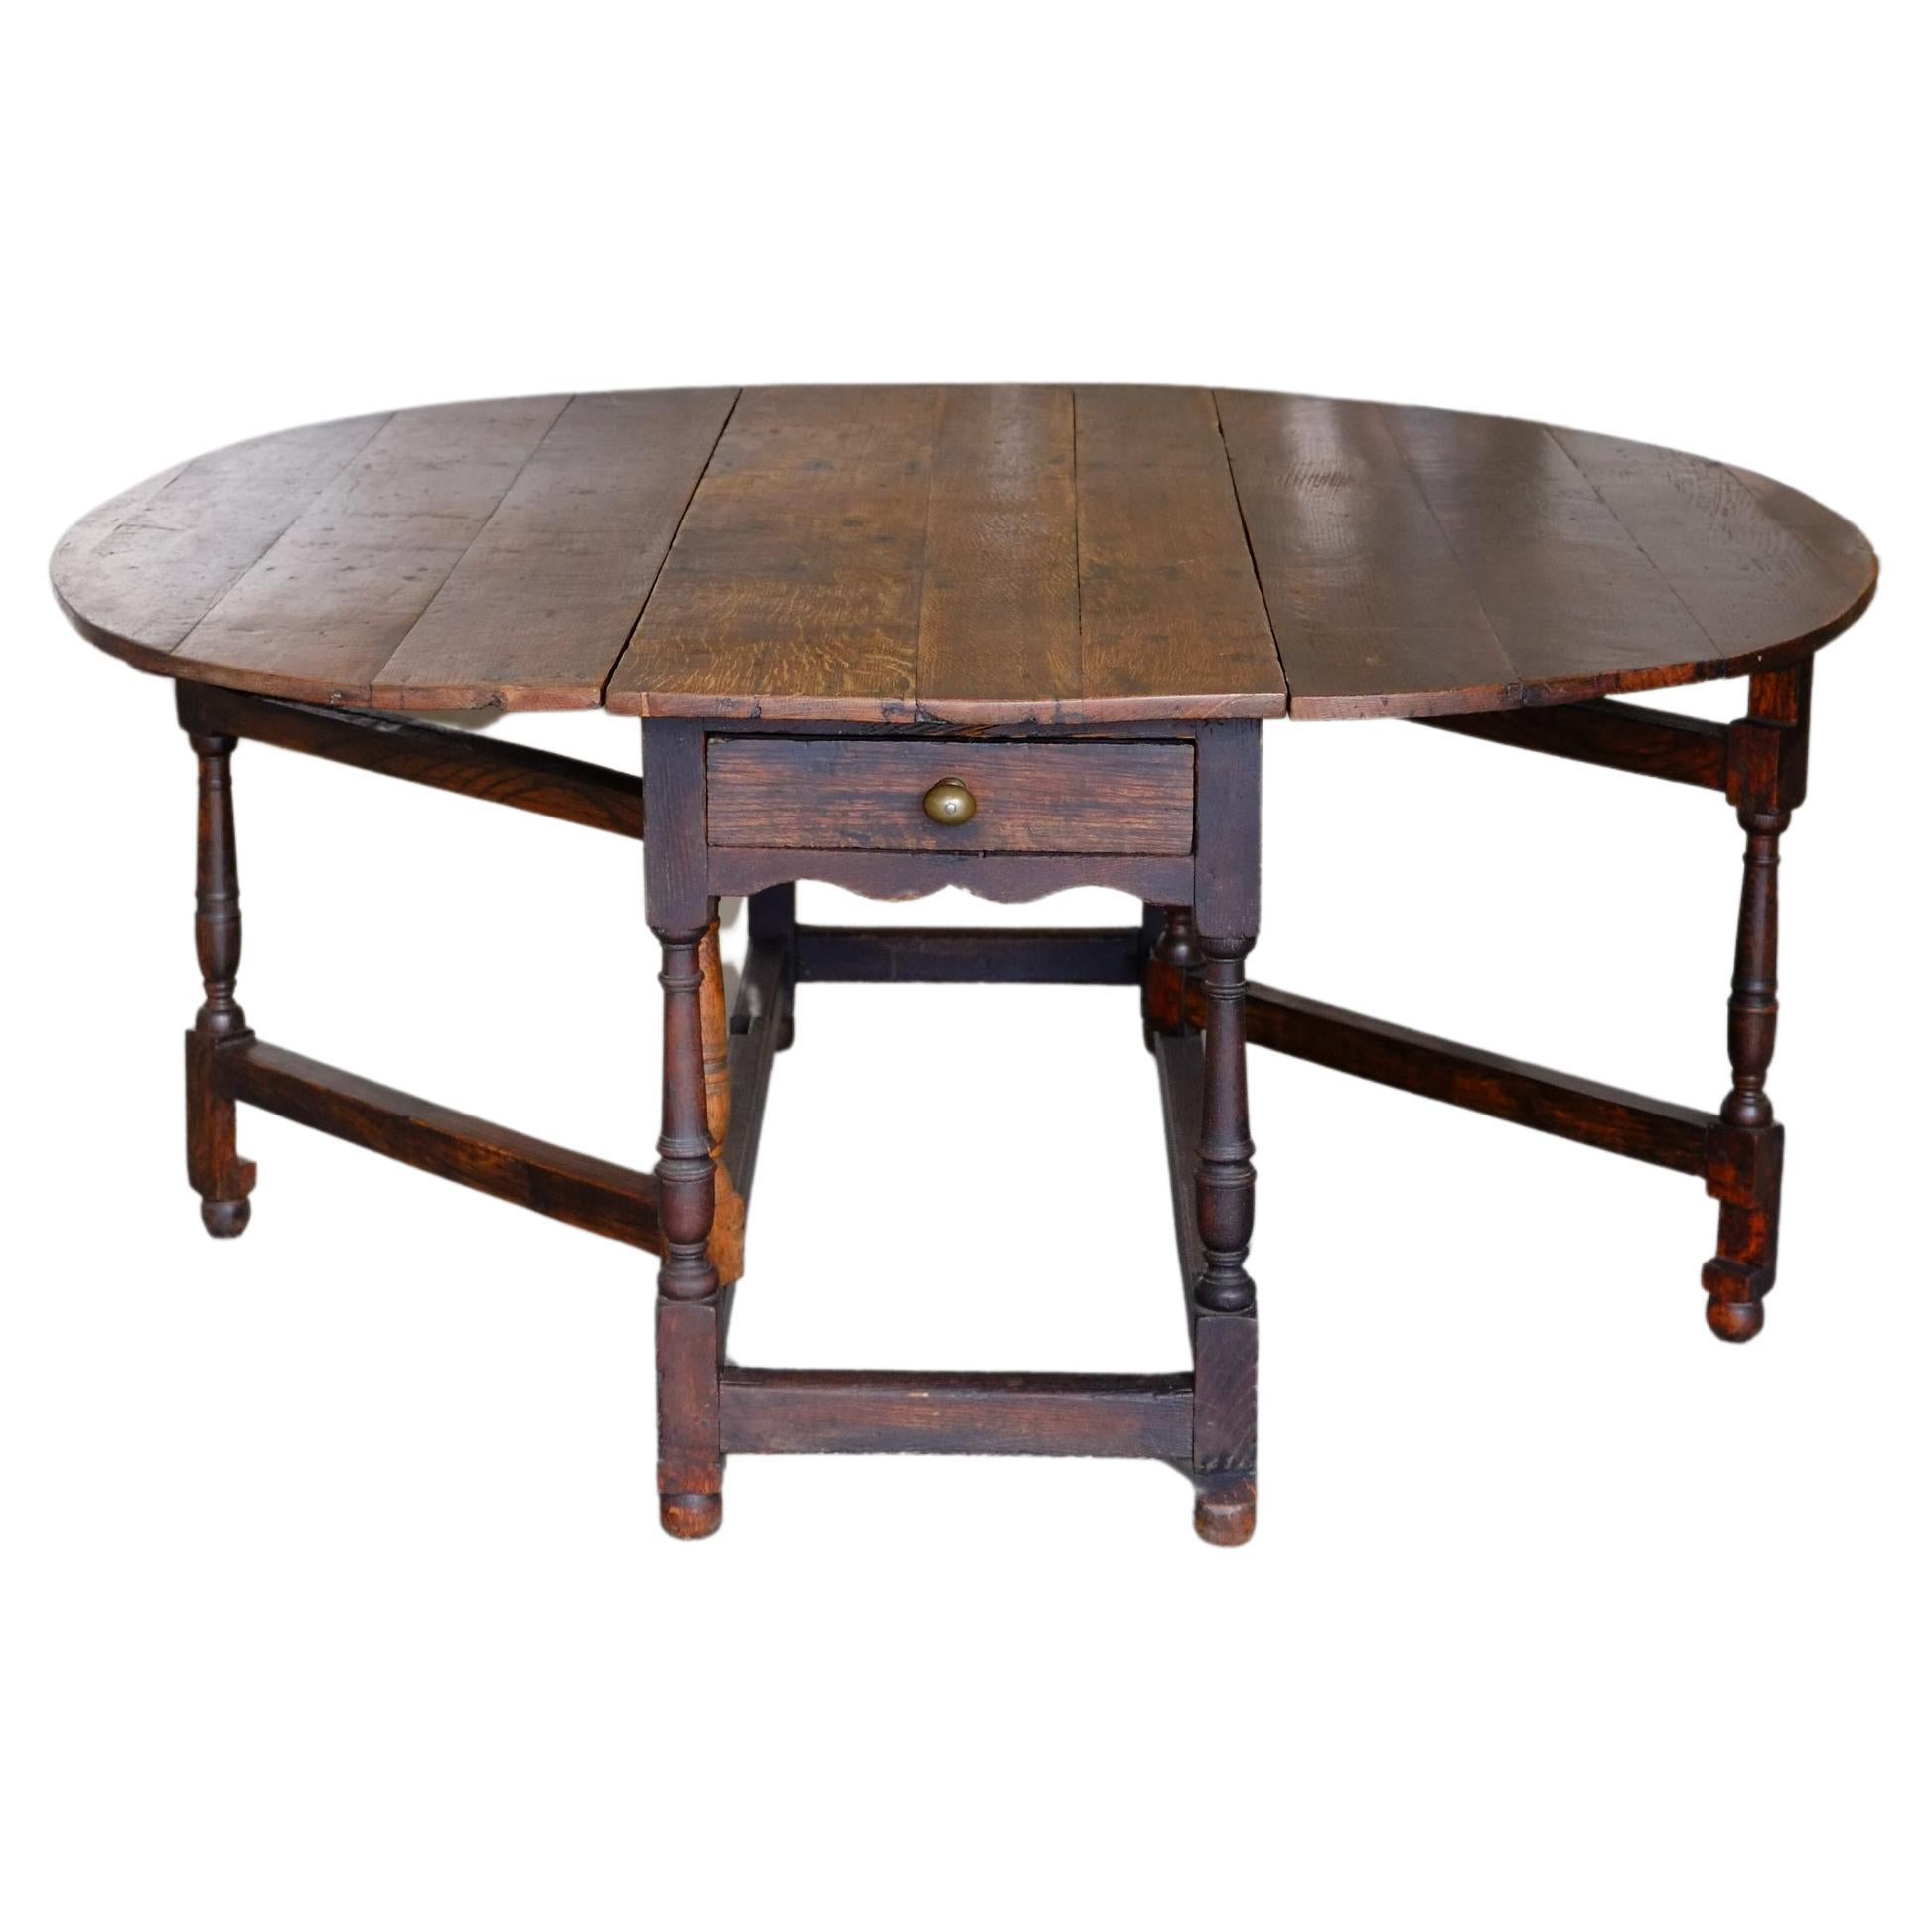 The most beautiful large oval drop leaf table in solid oak. This table has a stunning wide squared off oval shape once it is filly open with a wide solid oak planked top. The table top has a worn rich patina which has been unharmed through time. Two